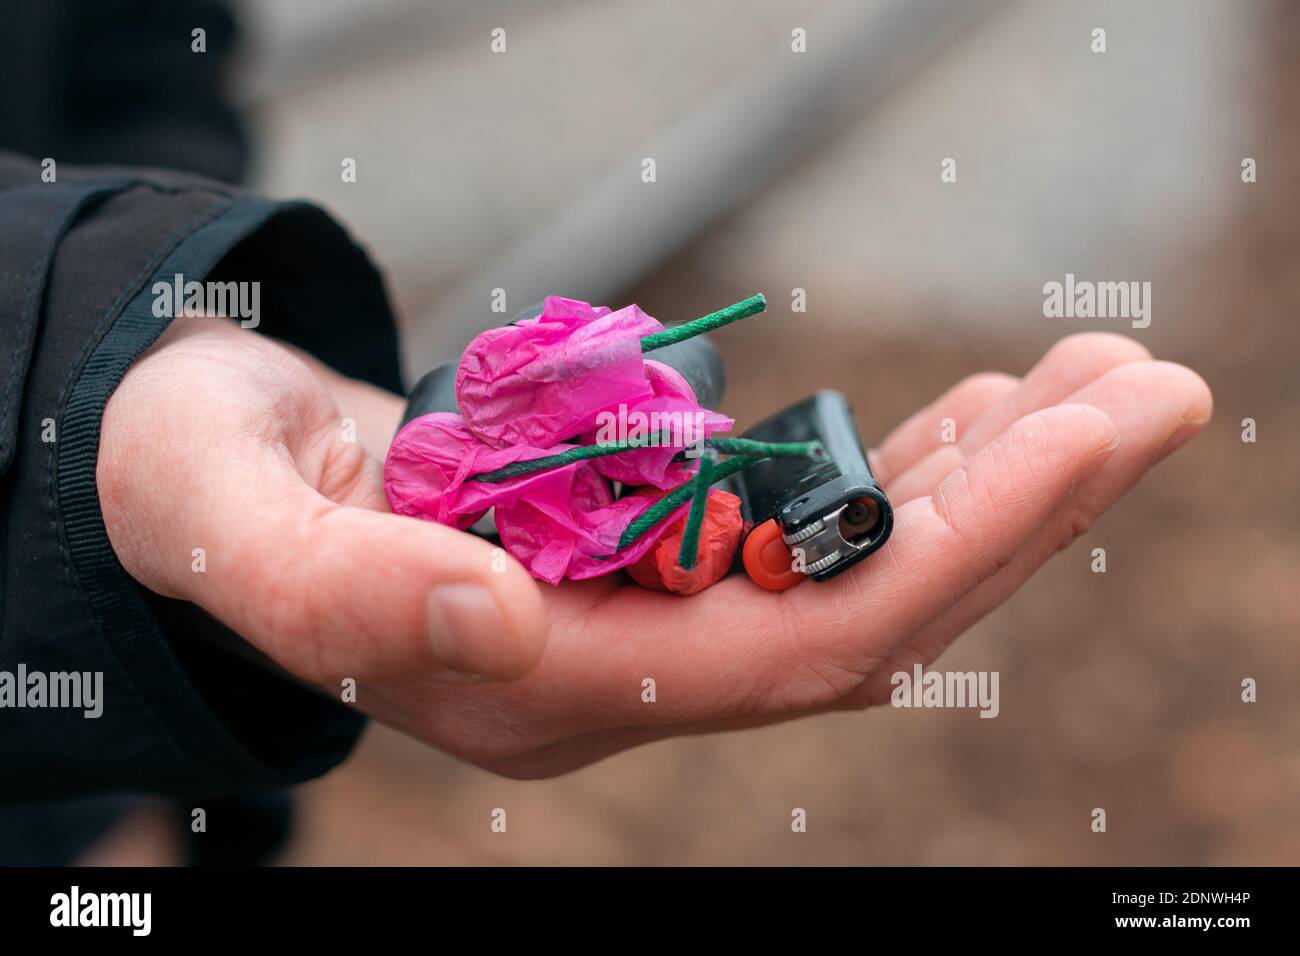 The Firecrackers in a Hand. Man Holding Five Black Petards with a Gas Lighter on His Palm. A Human with a Pyrotechnics Outdoors Stock Photo